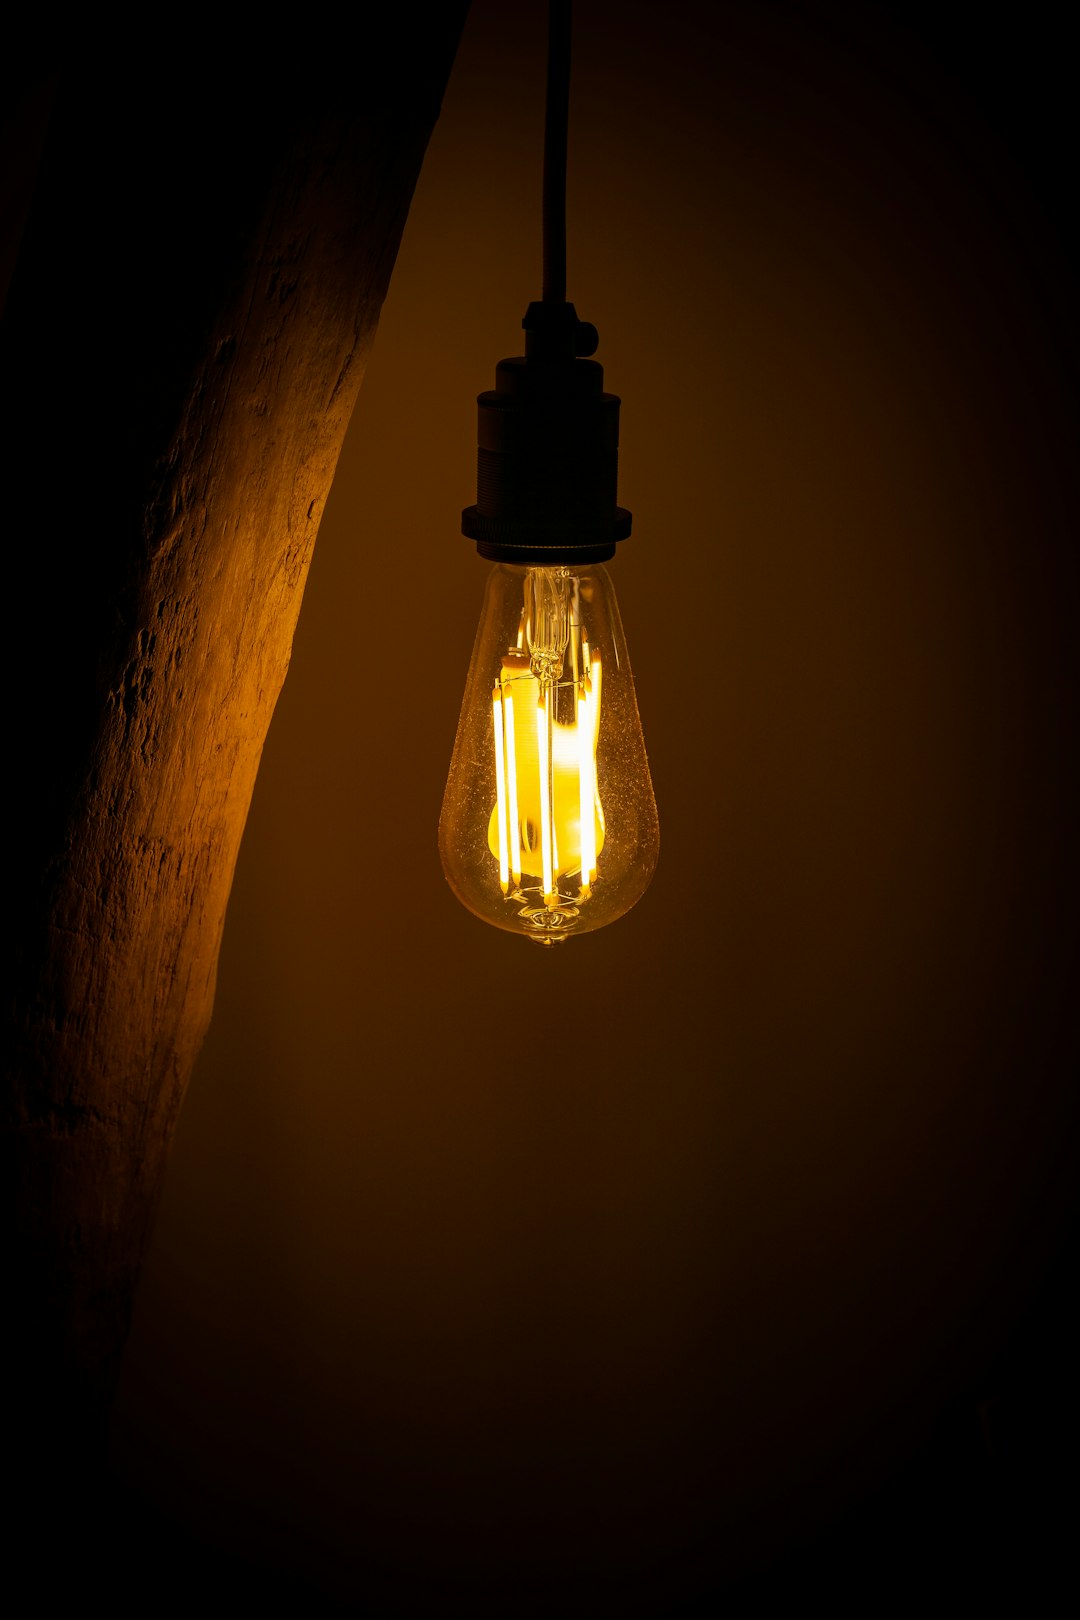 lighted incandescent lamp